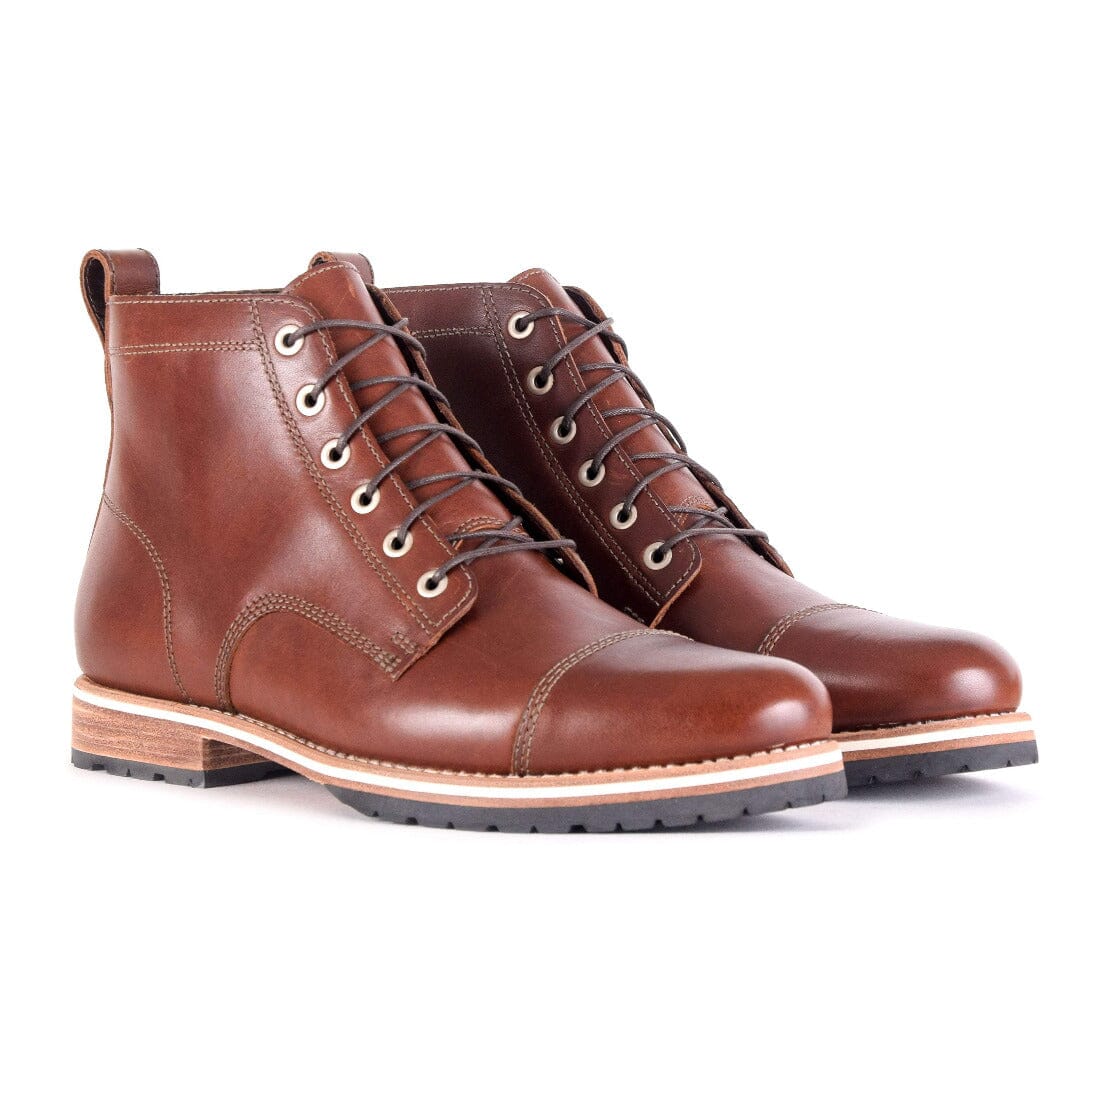 HELM Boots The Hollis, Brown